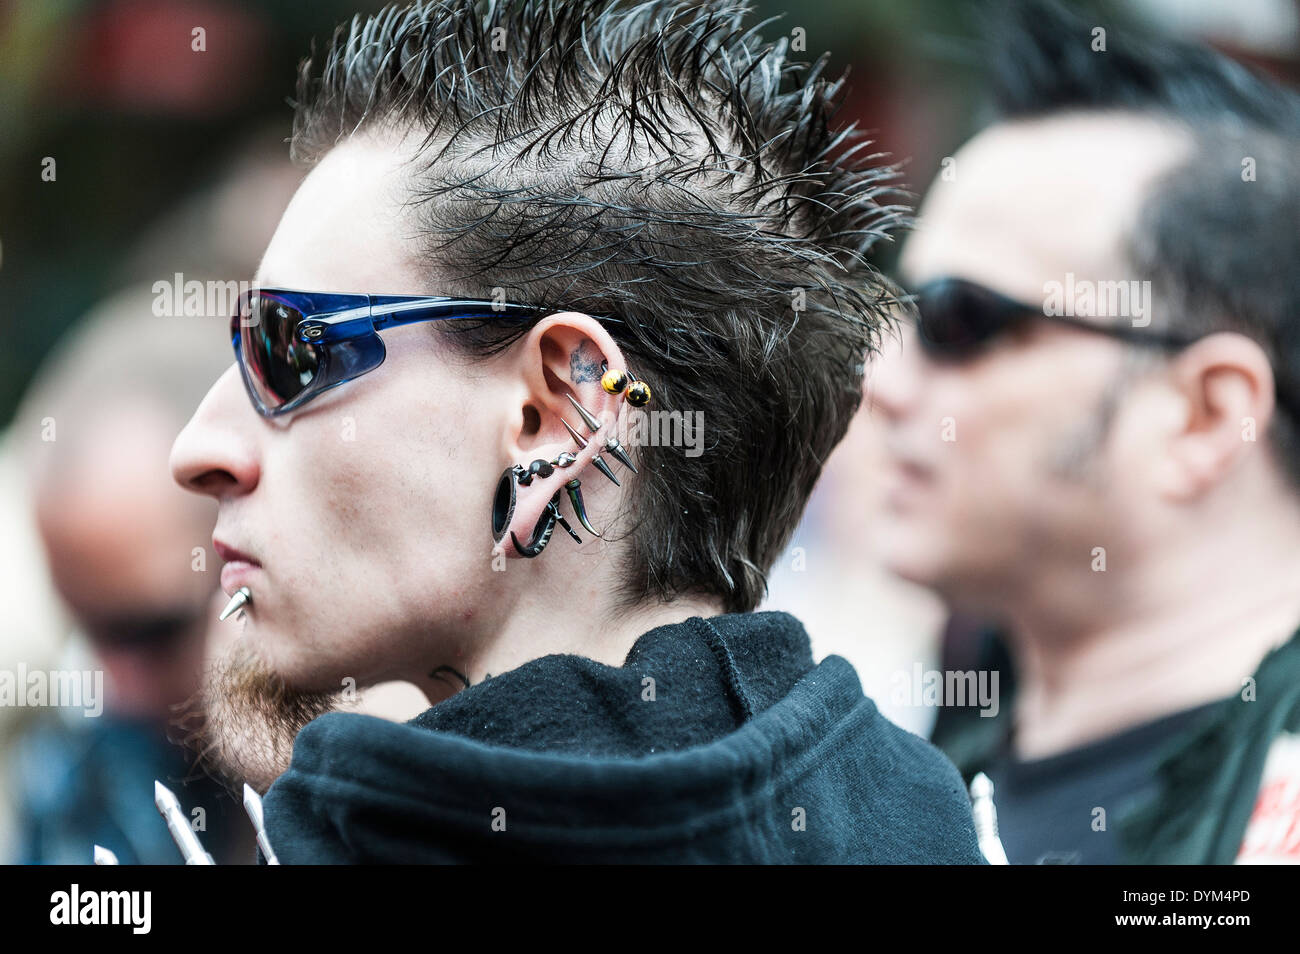 A young man with elaborate ear piercings. Stock Photo